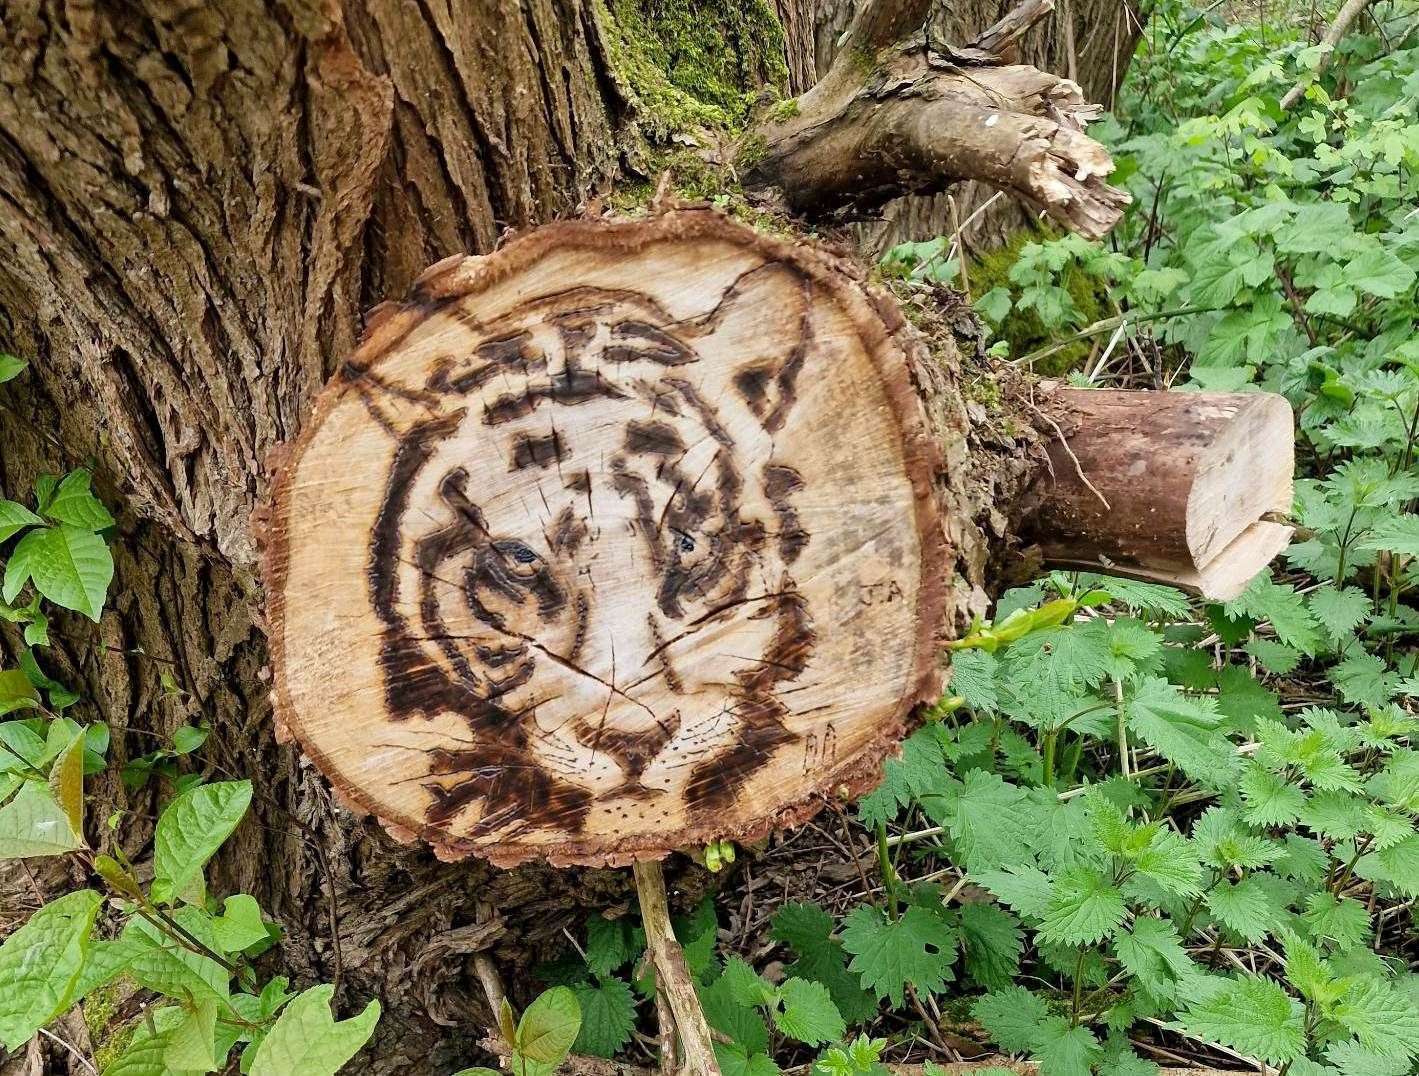 He recently created pictures of animals on tree stumps along a path at the Little Burton estatePictures: Jon Allcorn